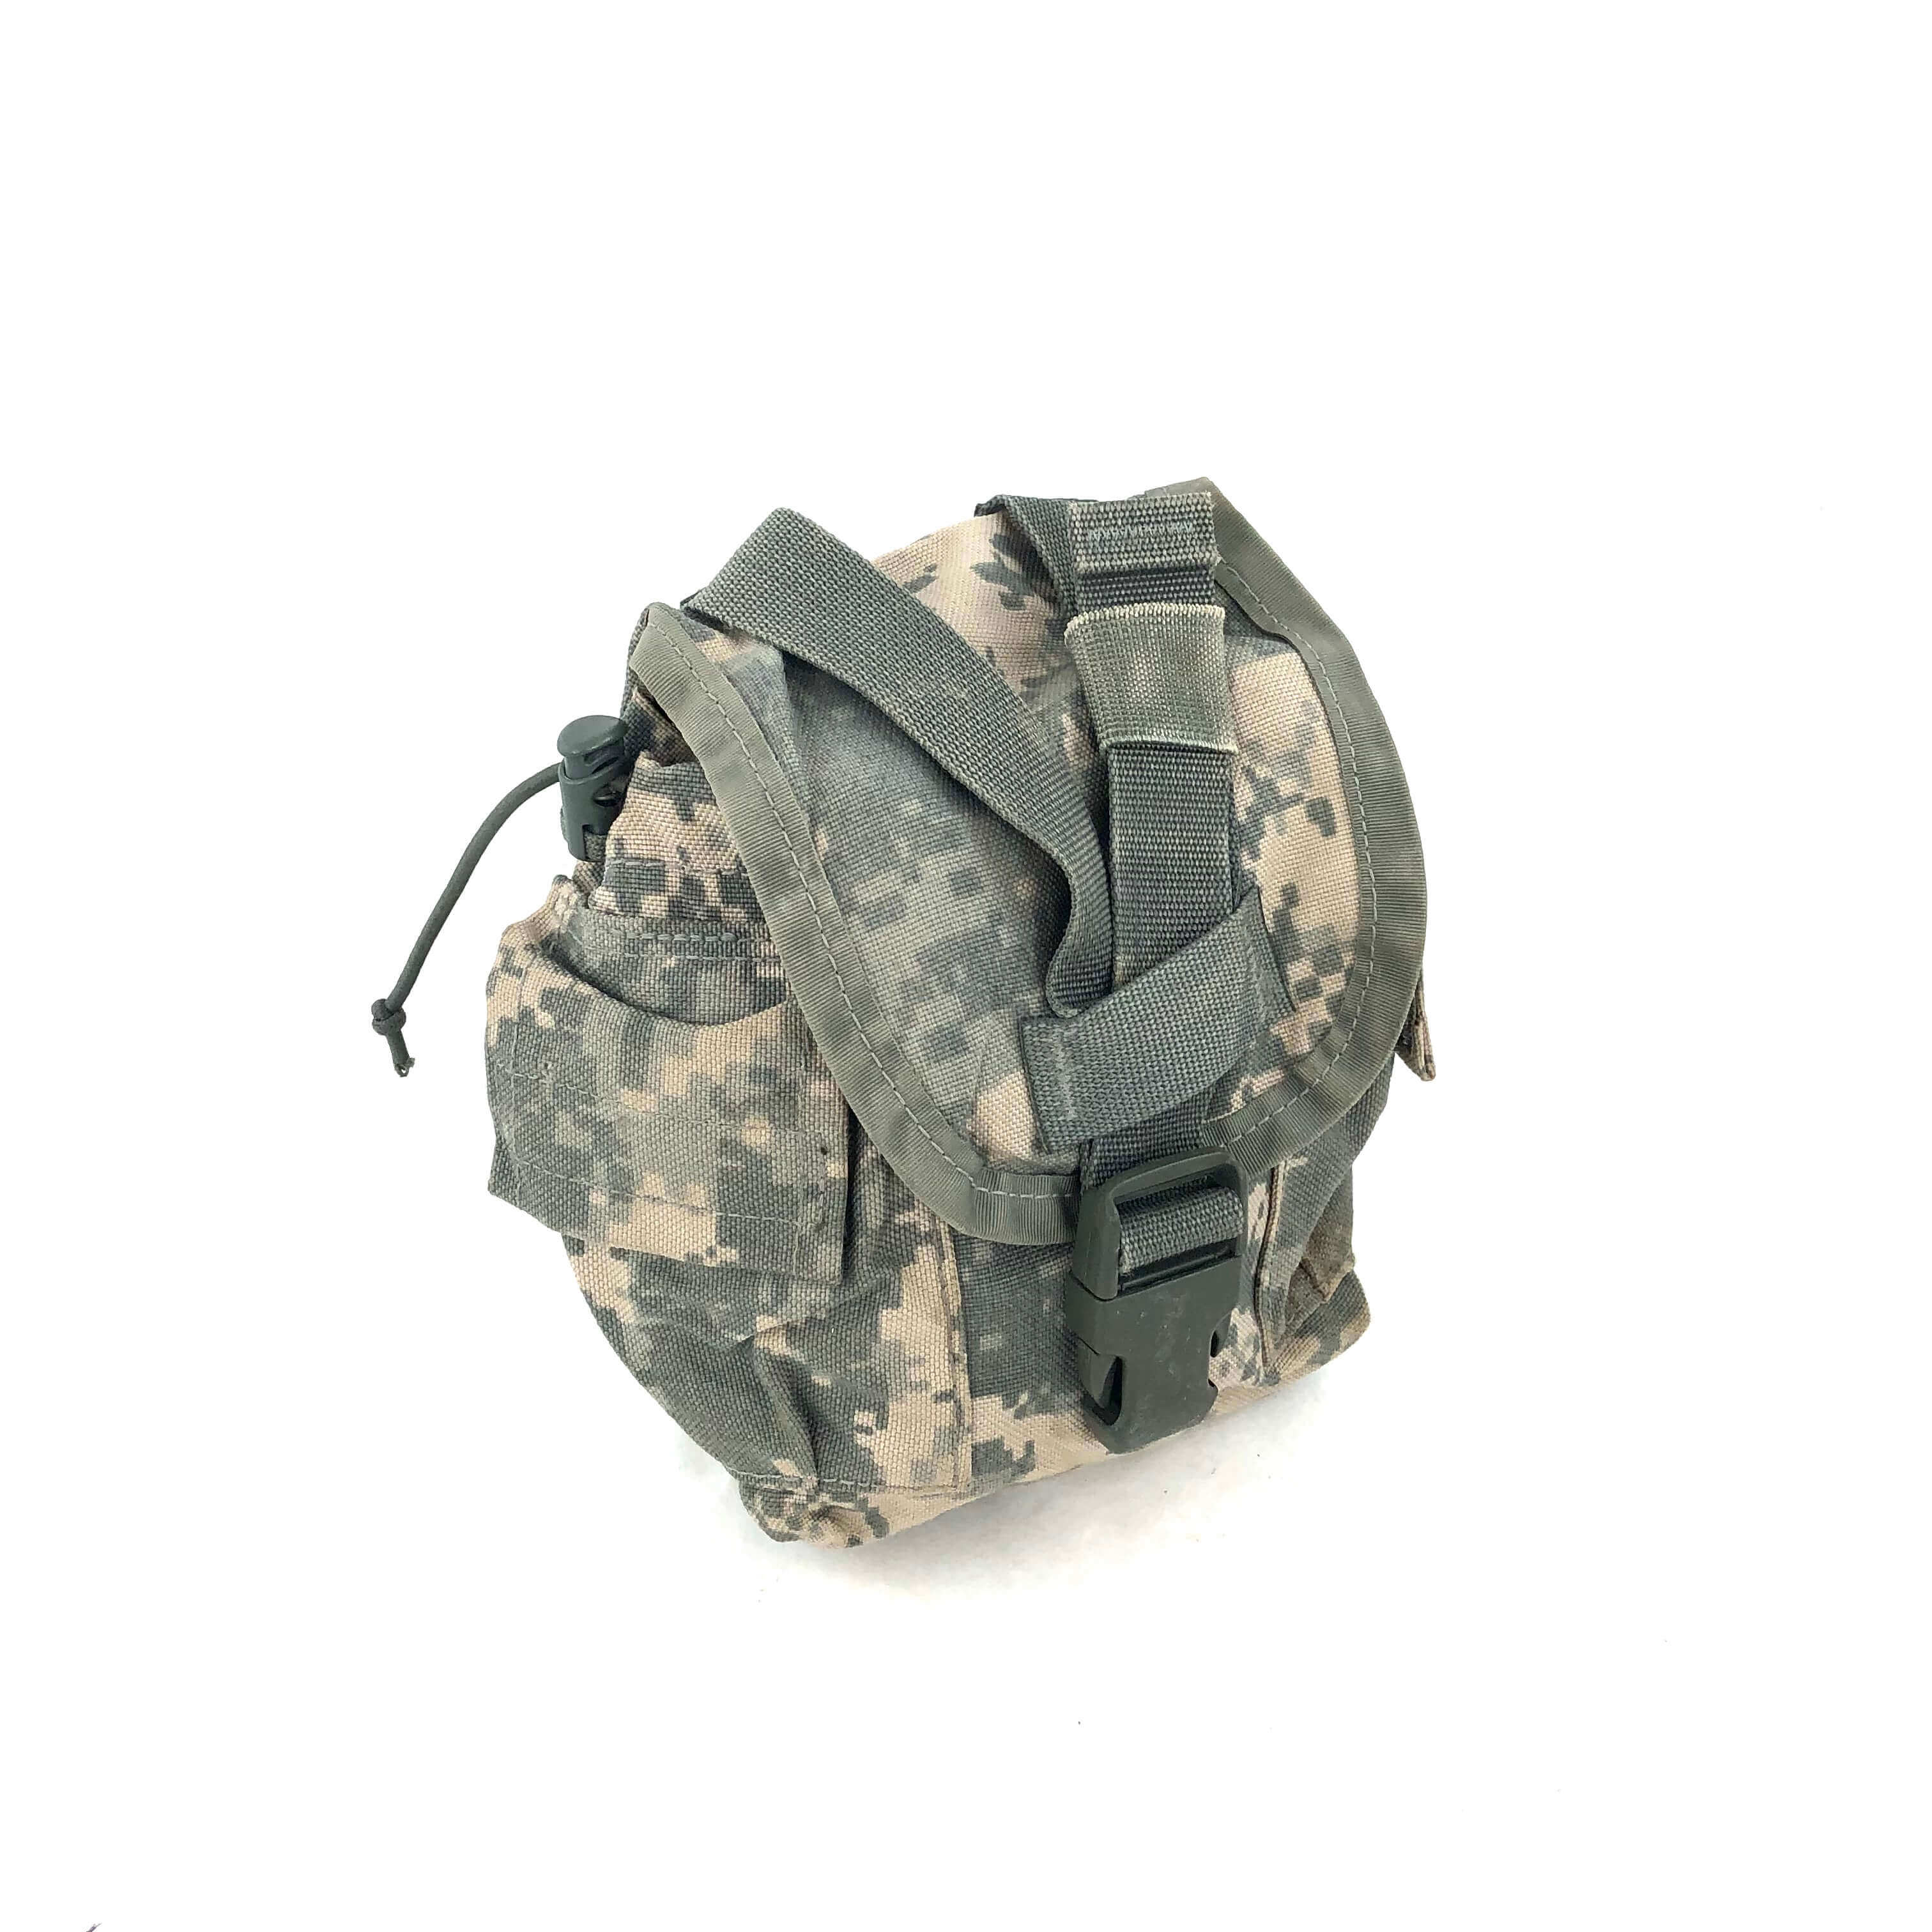 MOLLE II 1 QUART CANTEEN & GENERAL PURPOSE POUCH GOOD CONDITION DIGITAL ACU